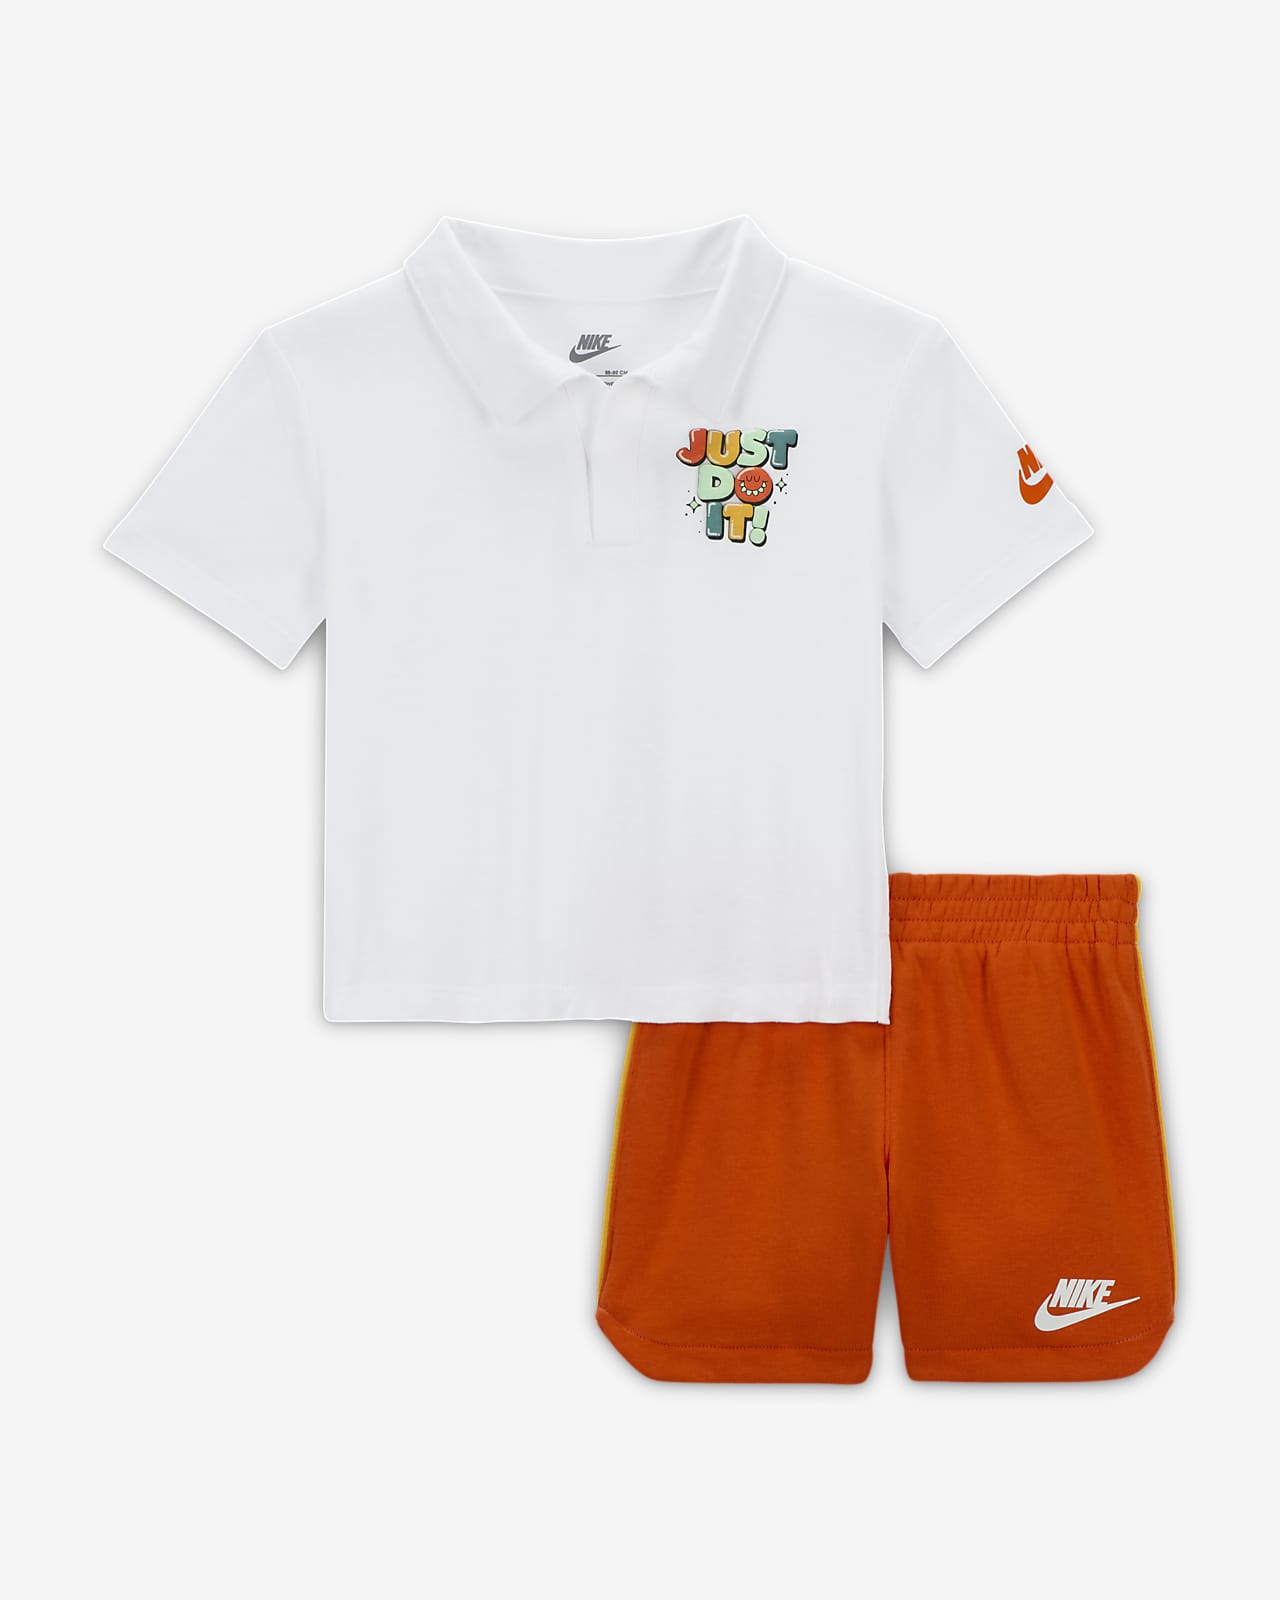 Nike Sportswear Create Your Own Adventure Baby (12-24M) Polo and Shorts Set